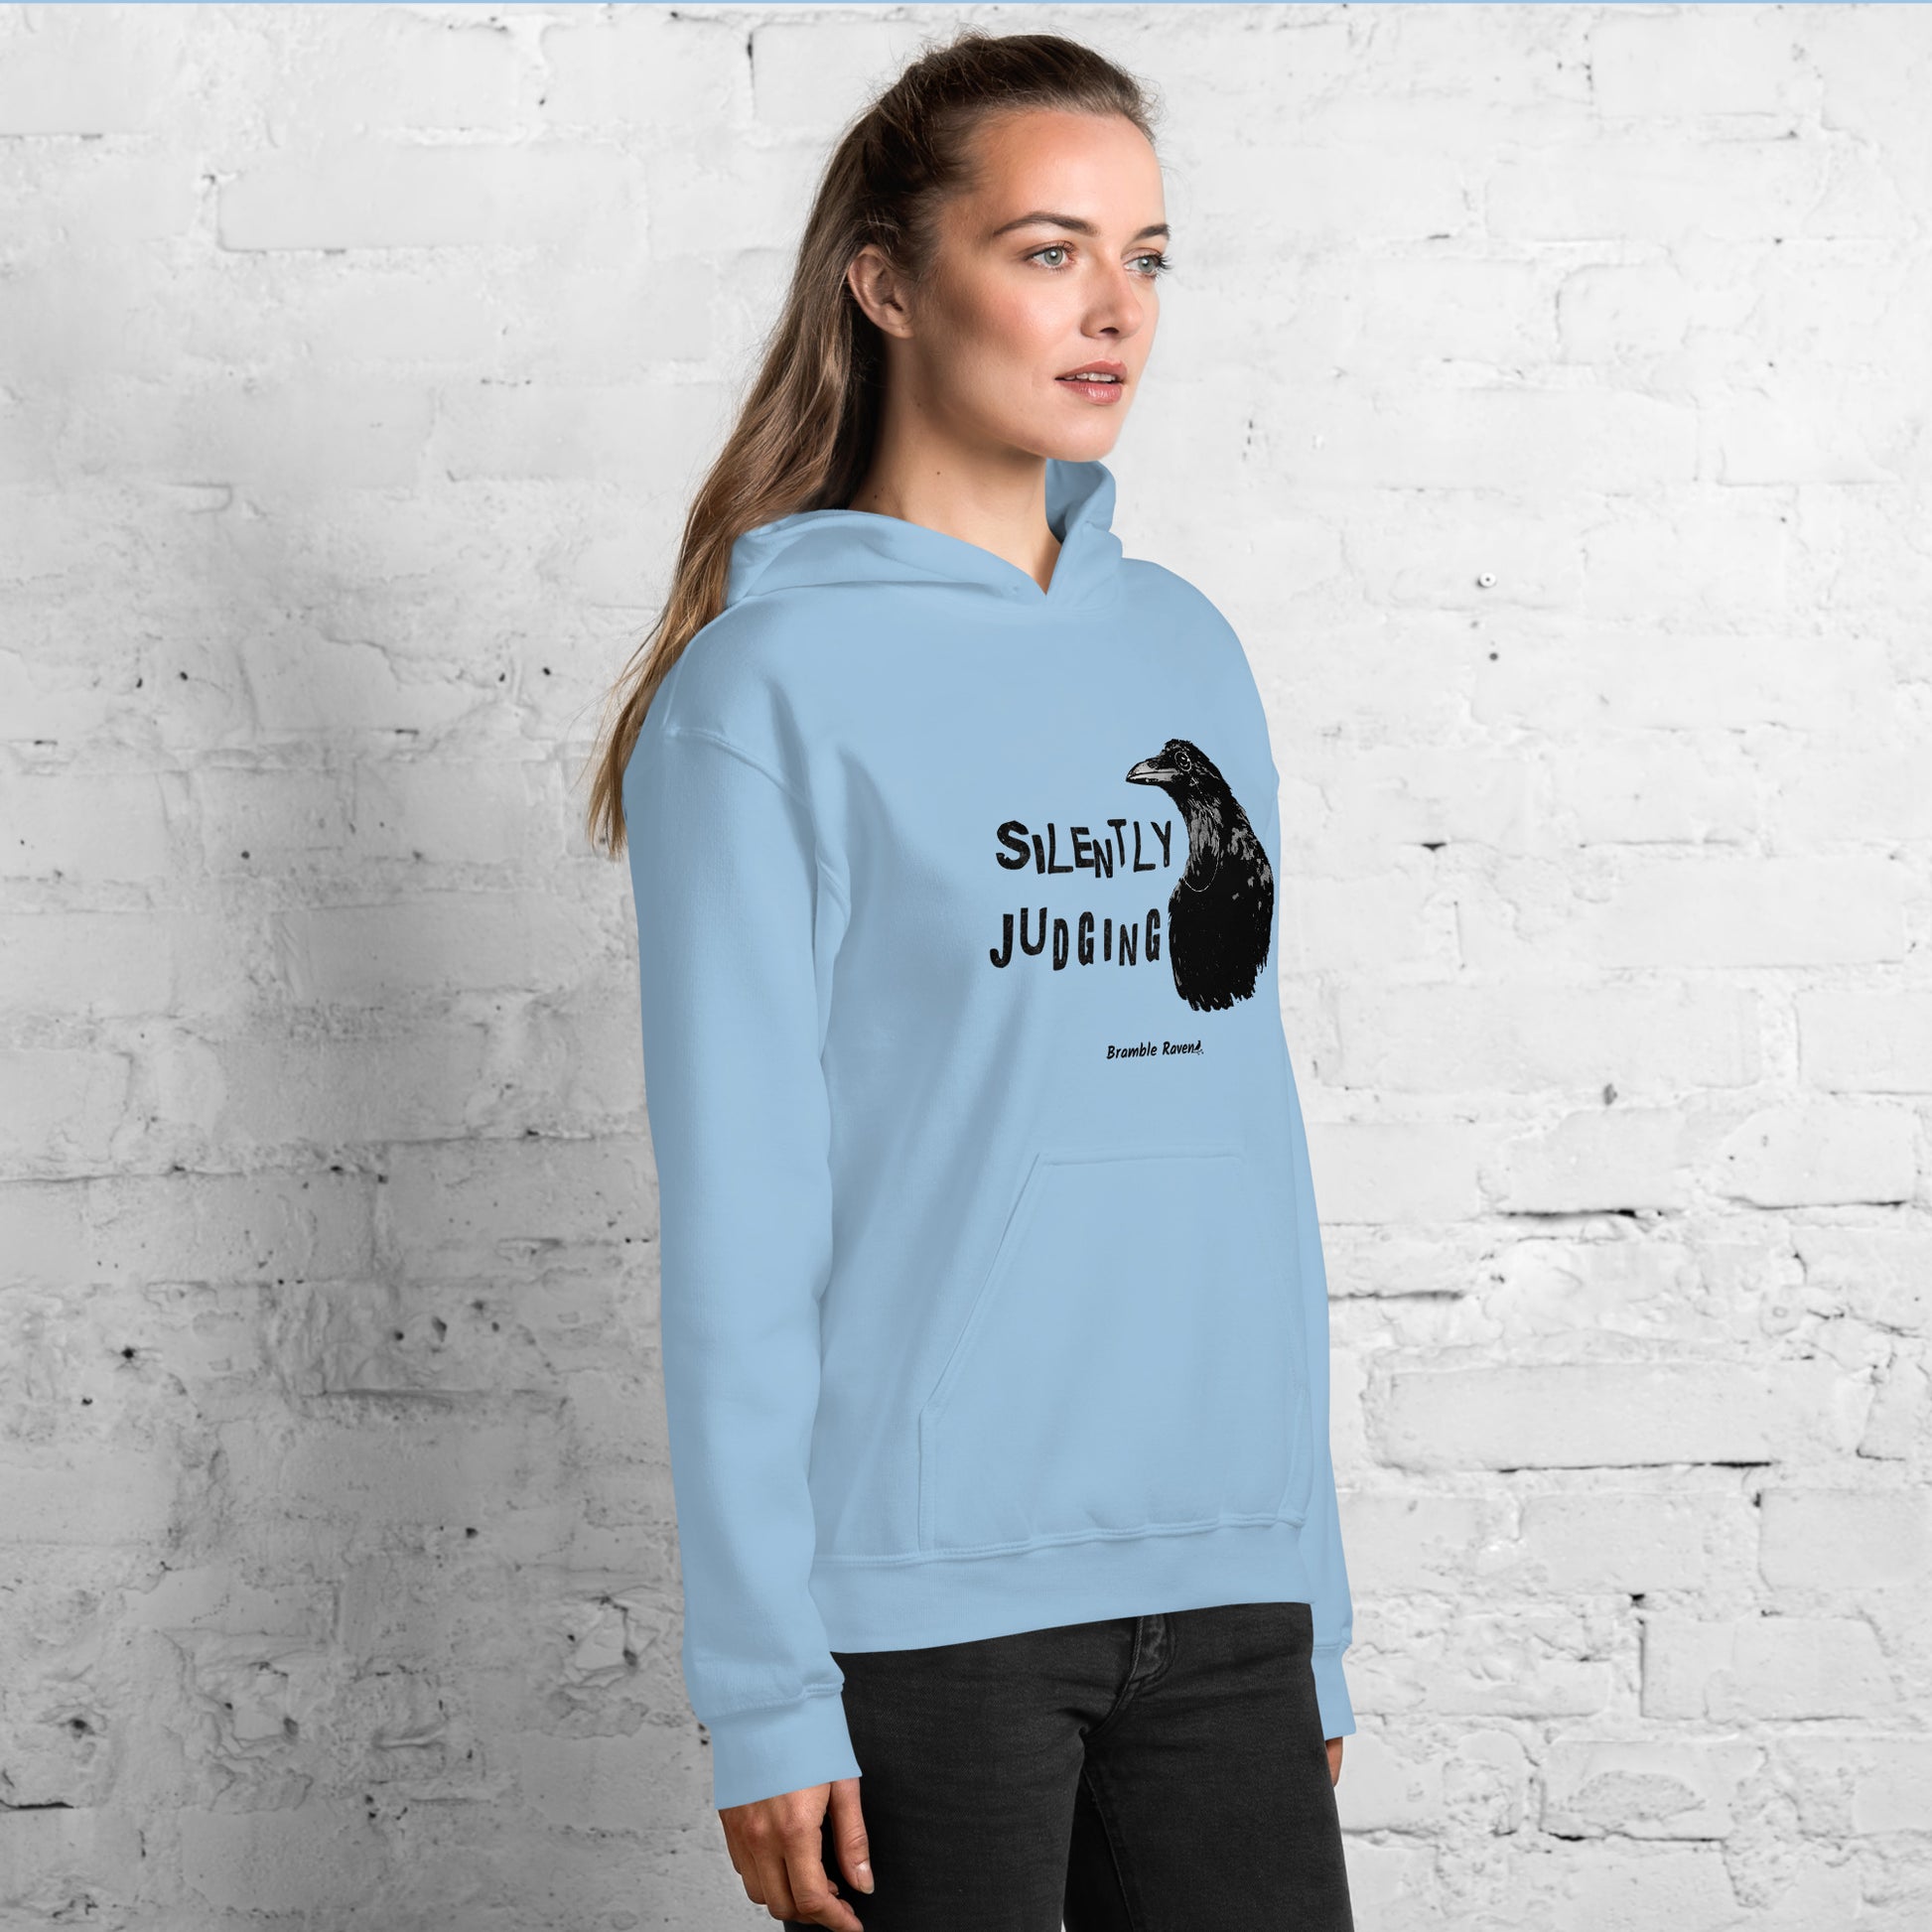 Unisex light blue colored hoodie with horizontal design of silently judging text by black crow wearing a monocle.  Design on the front of hoodie. Features double-lined hood and front pouch pocket. Shown on female model facing right.